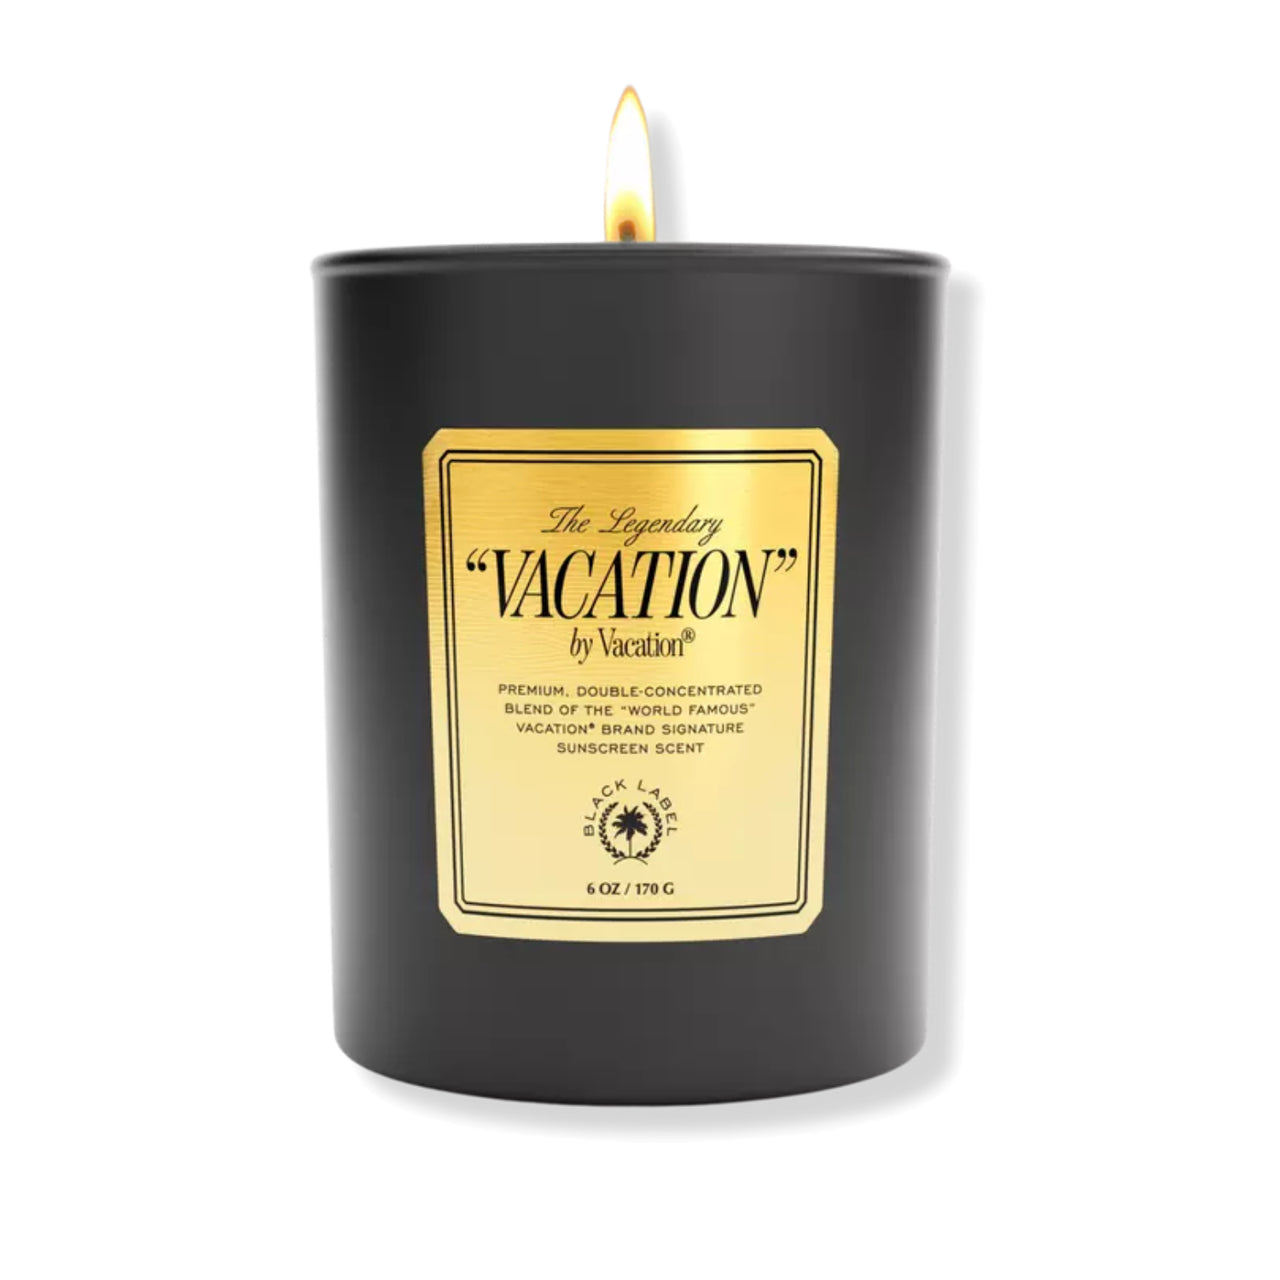 Vacation Perfumed Candle